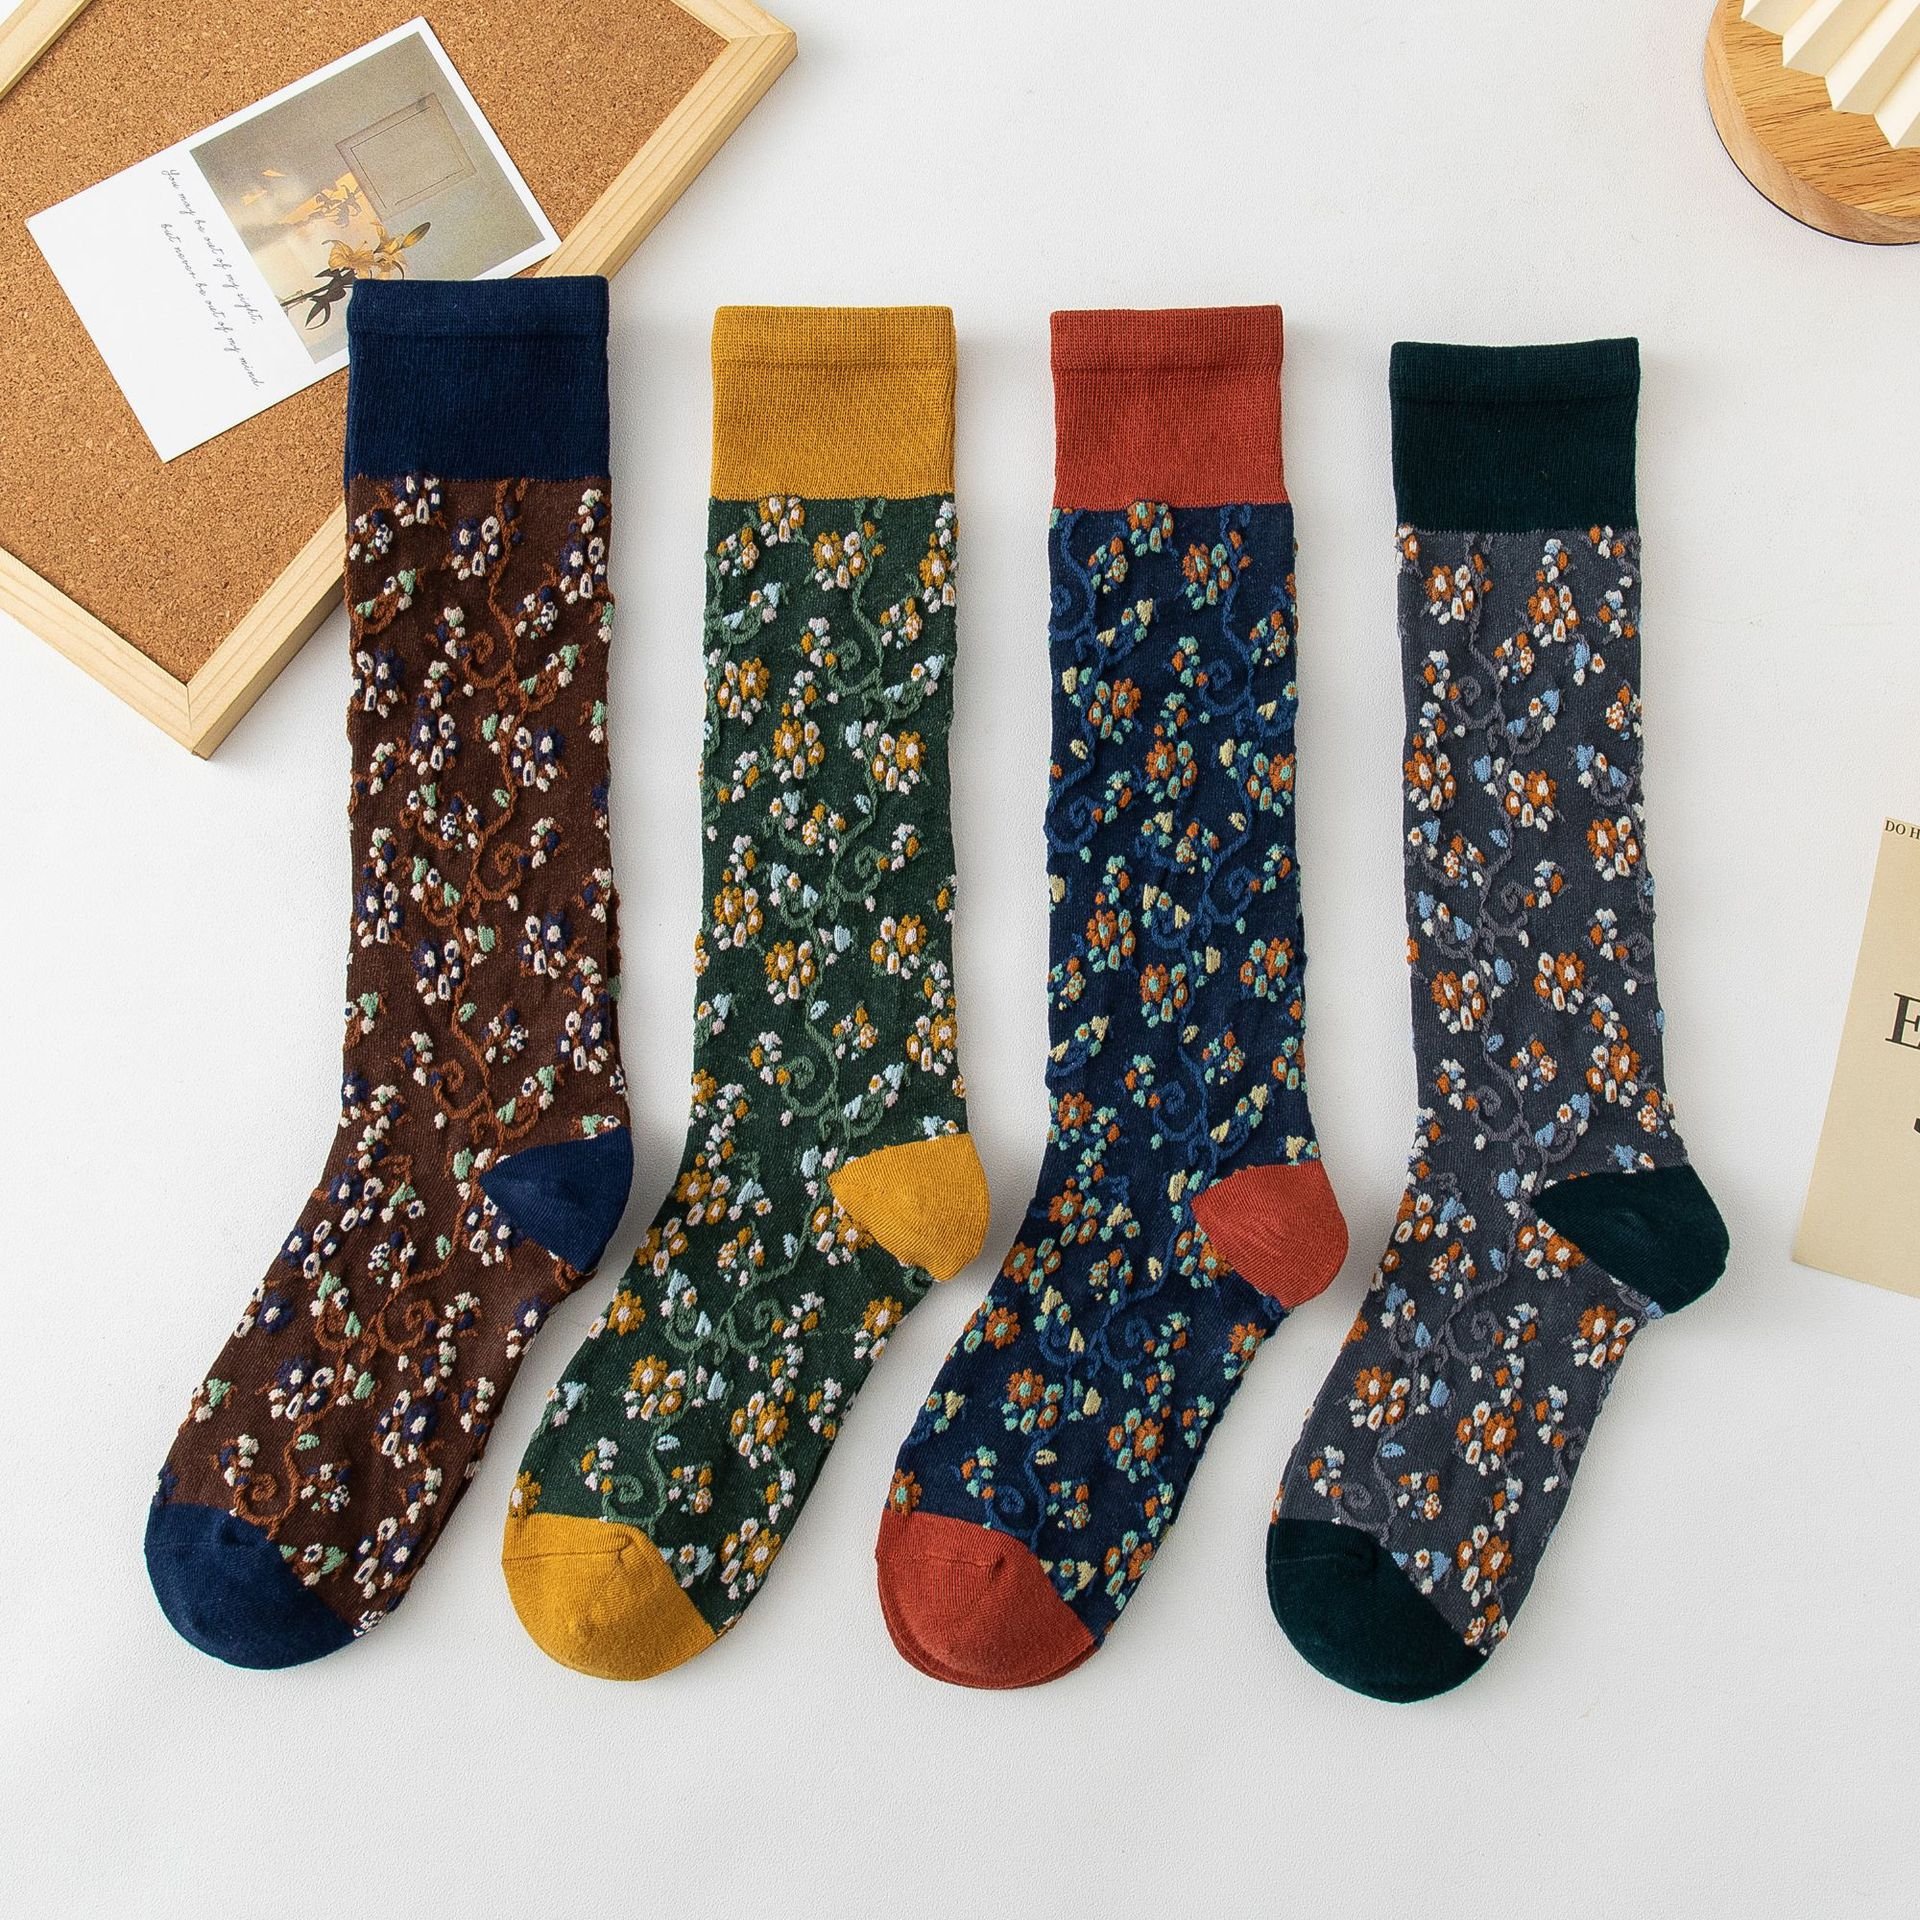 50%OFF-4 Pairs Womens Floral Long Cotton Socks